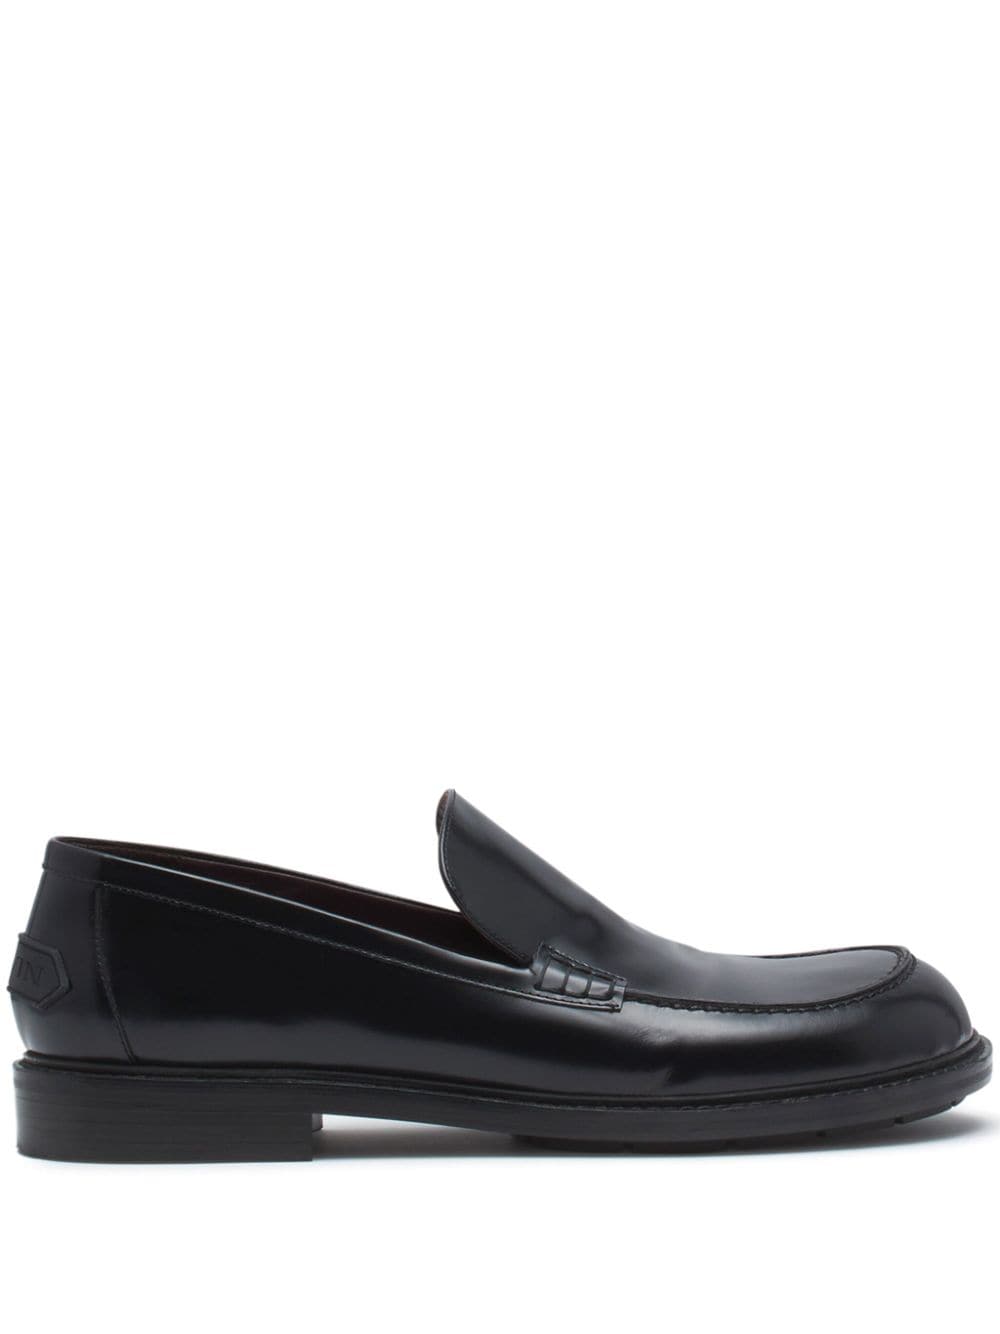 Lanvin Spinto glossy-leather loafers Black